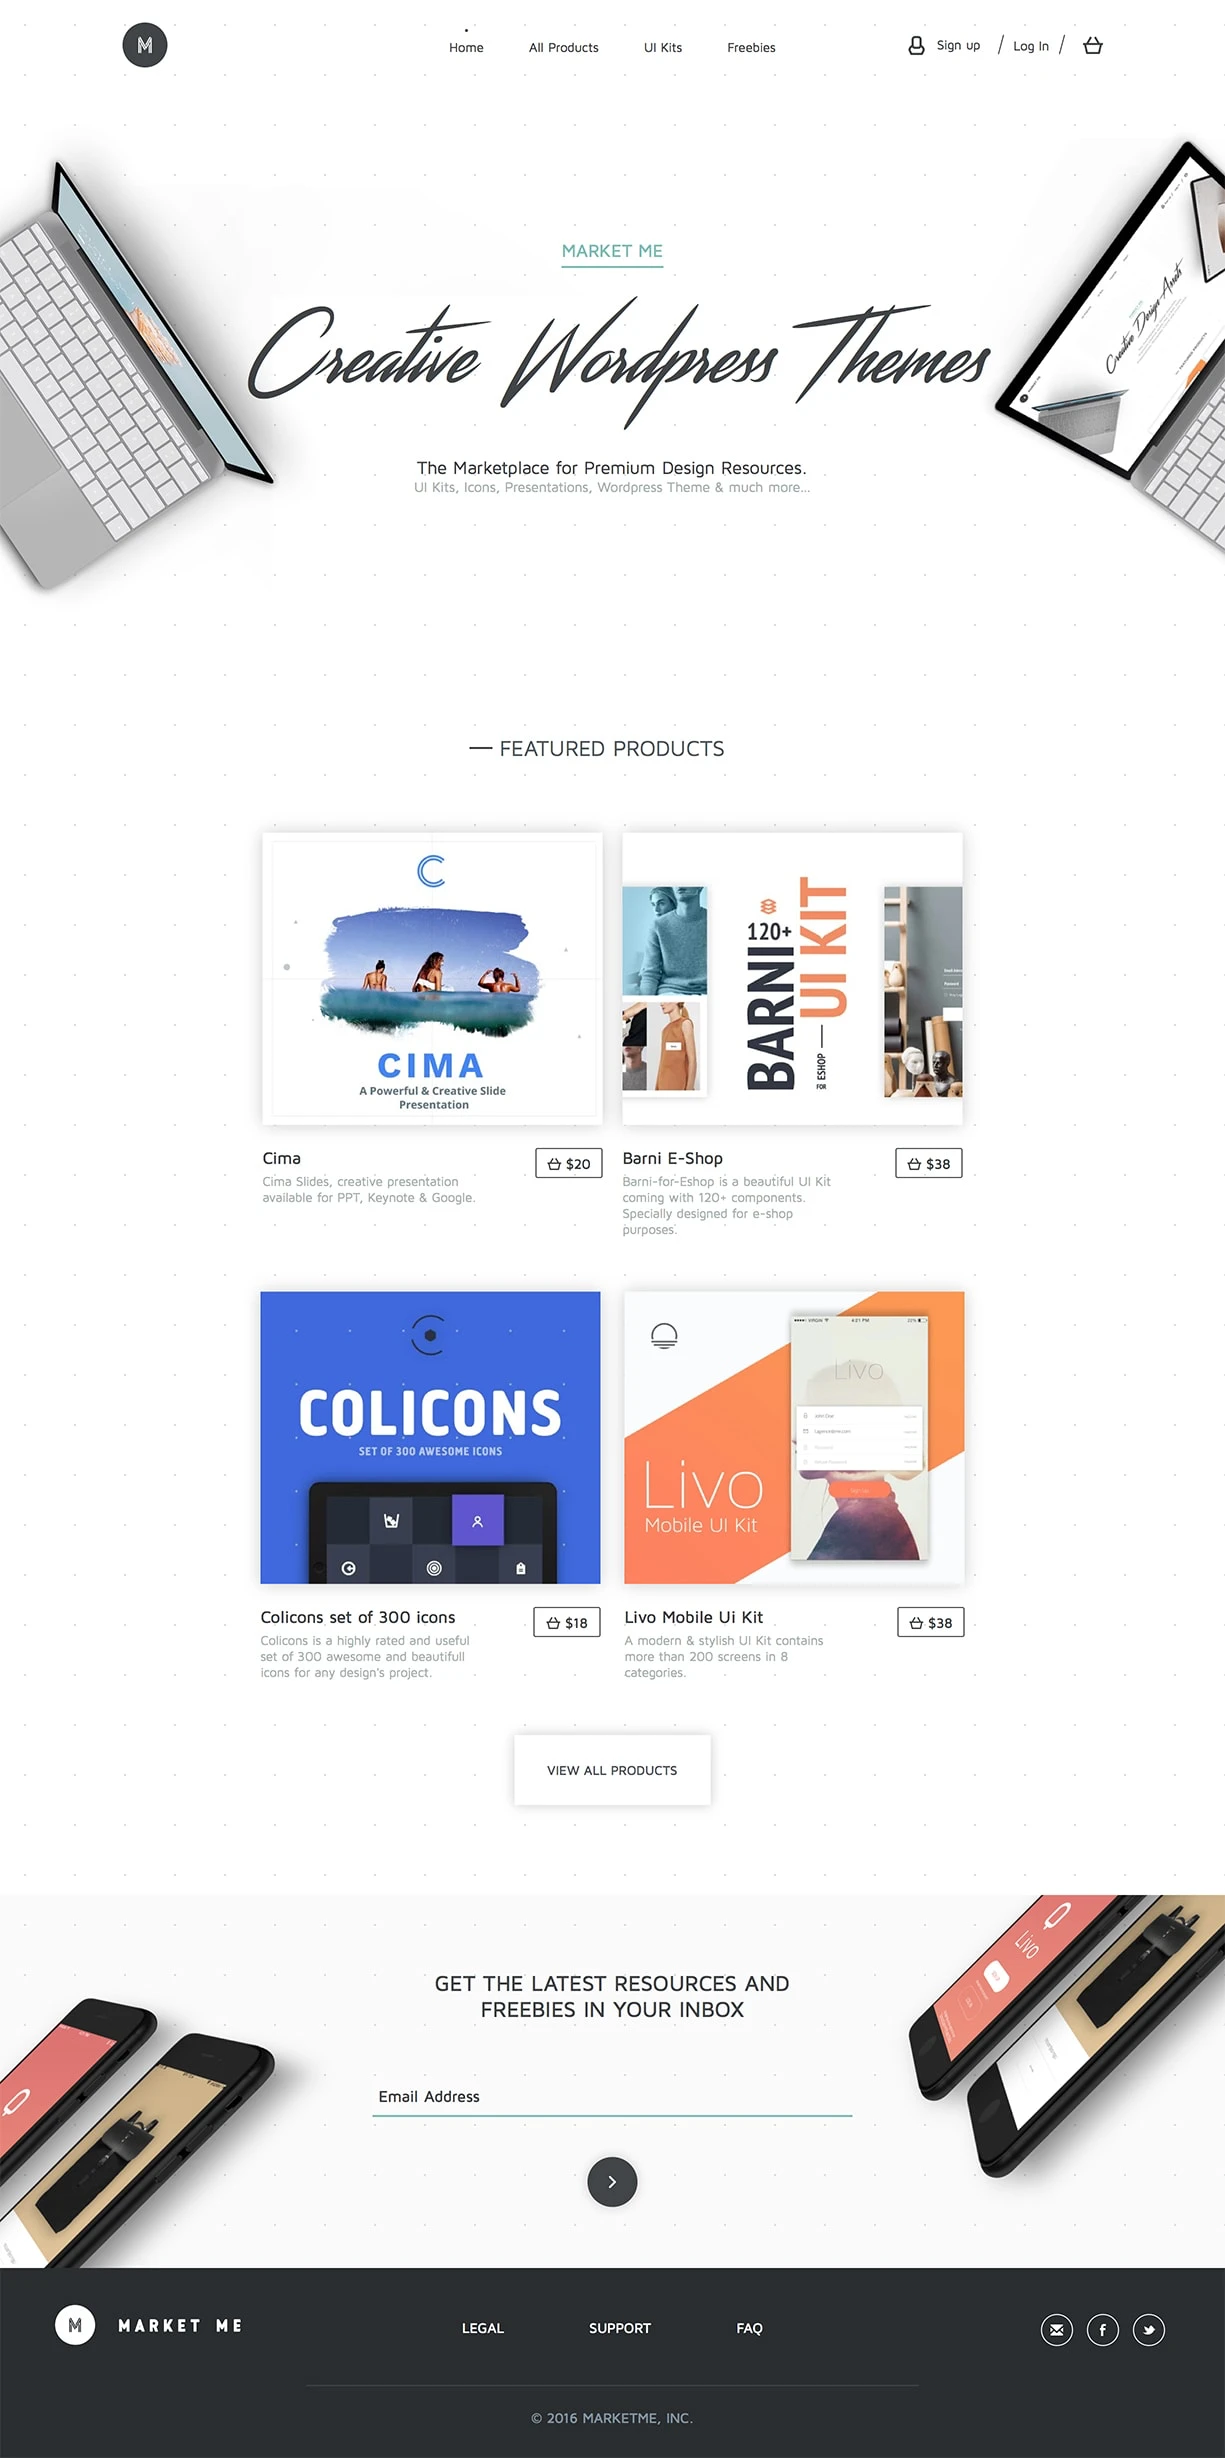 Market Me Landing Page Example: The marketplace for design resources. Buy Premium Creative Design Contents Like, UI Kits, Wordpress Theme, Presentations, Icons and much more… 